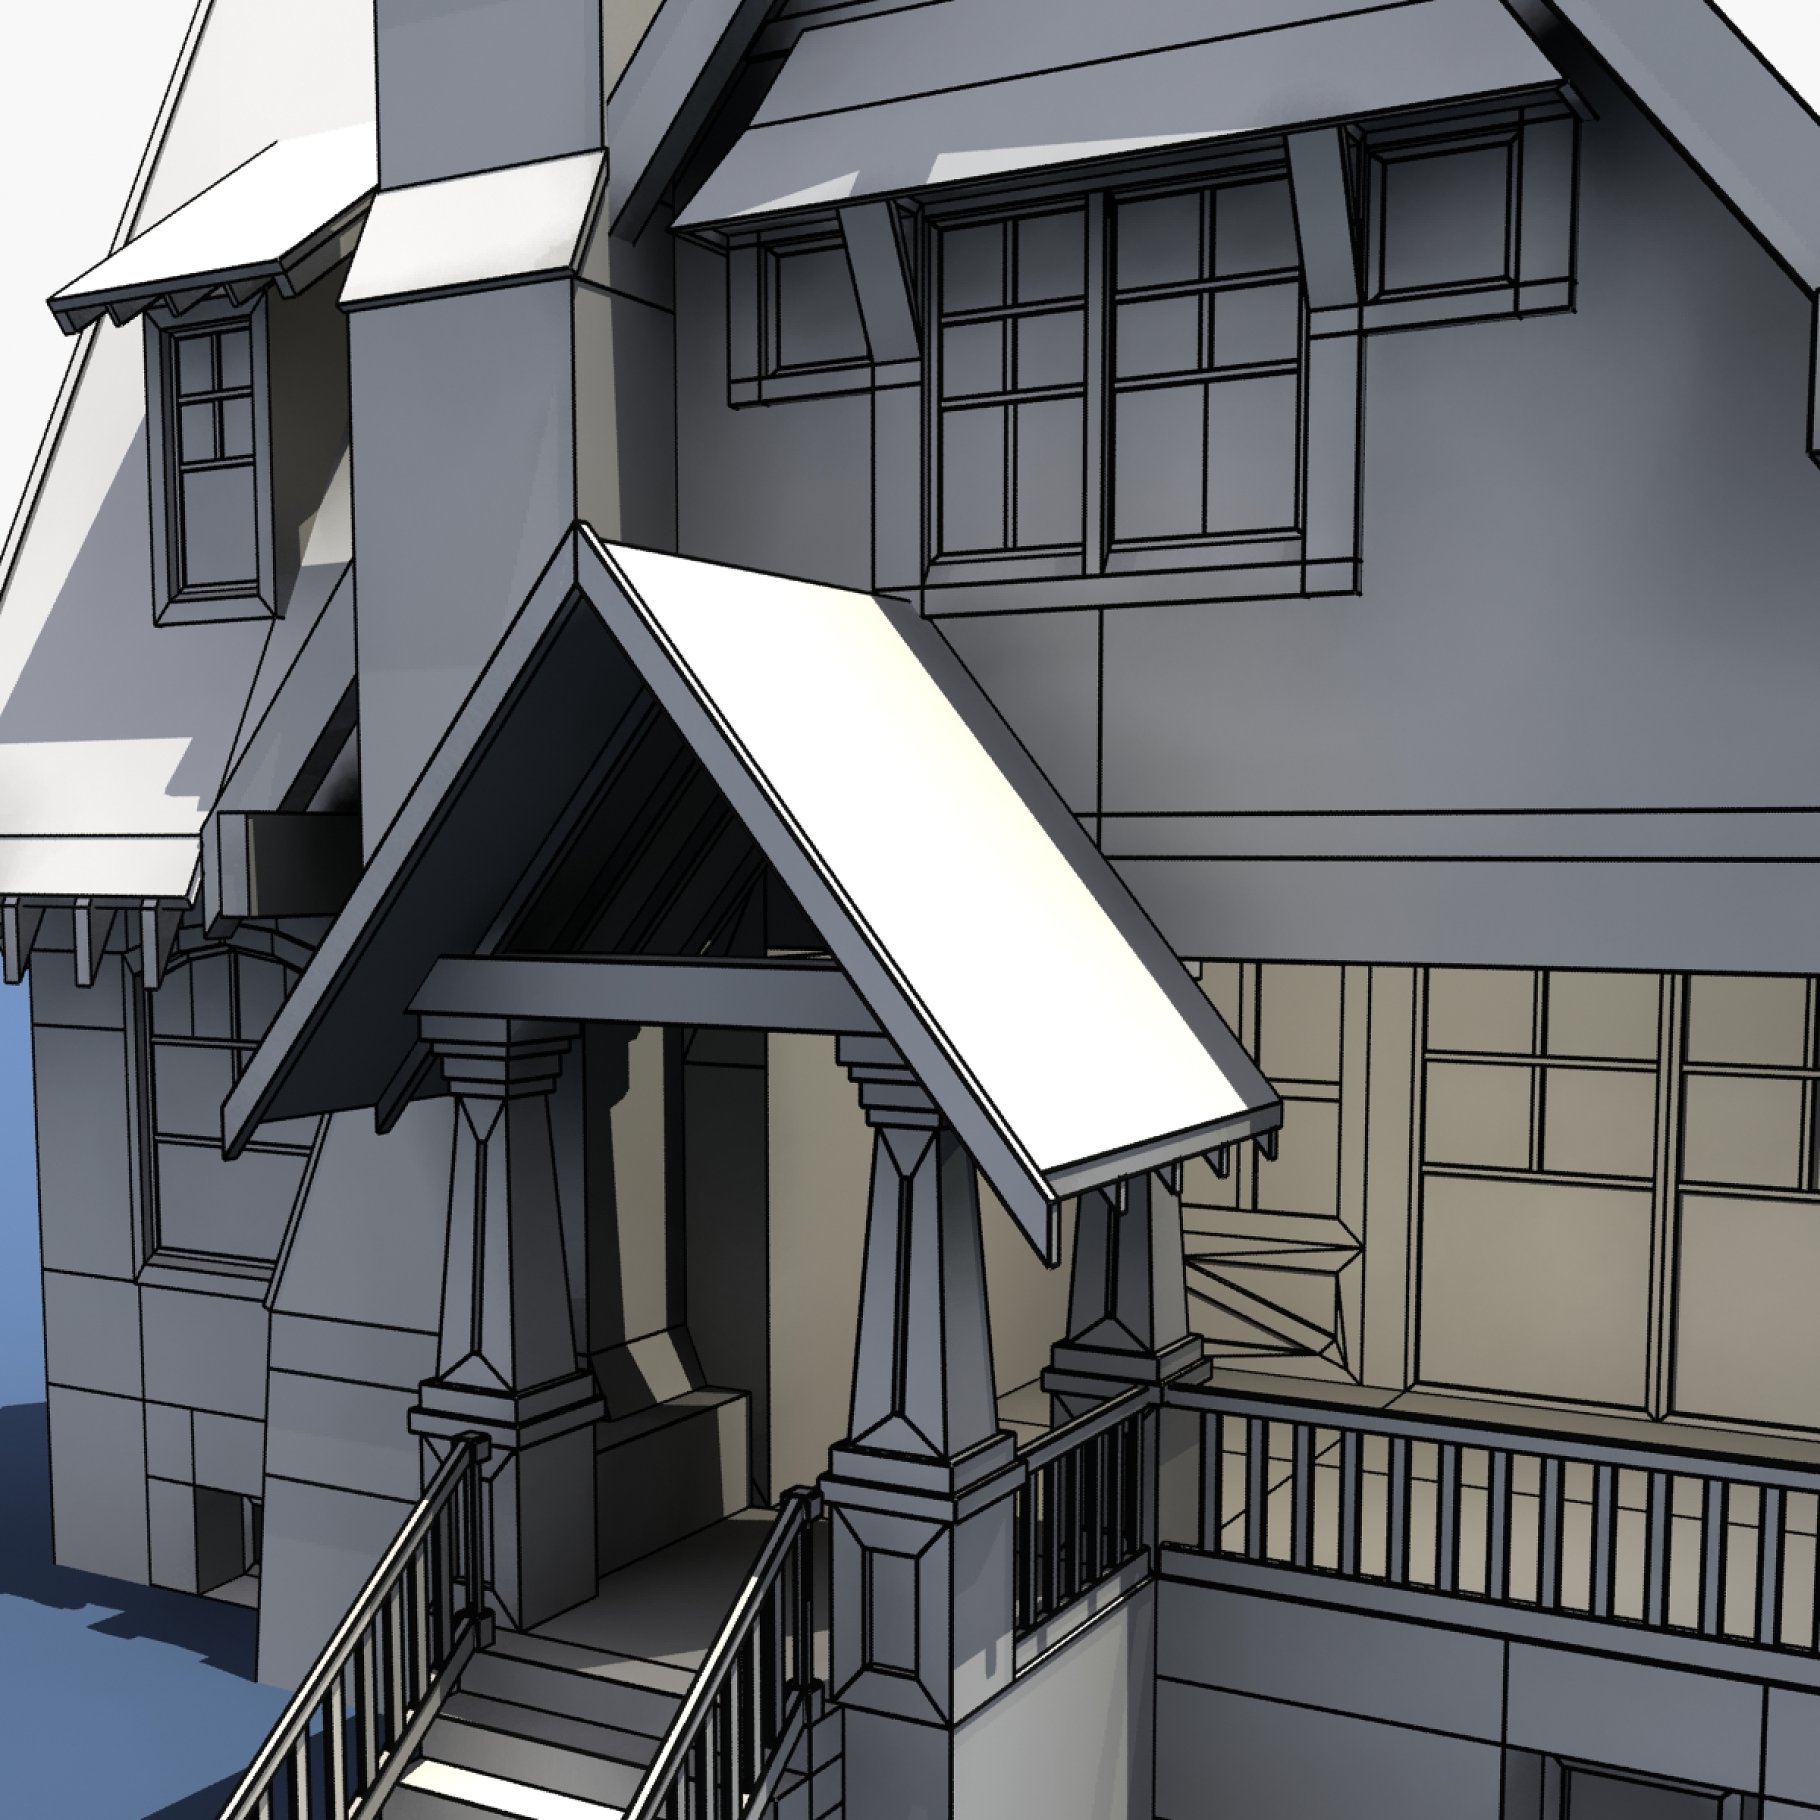 Low poly house front graphic mockup in close-up.